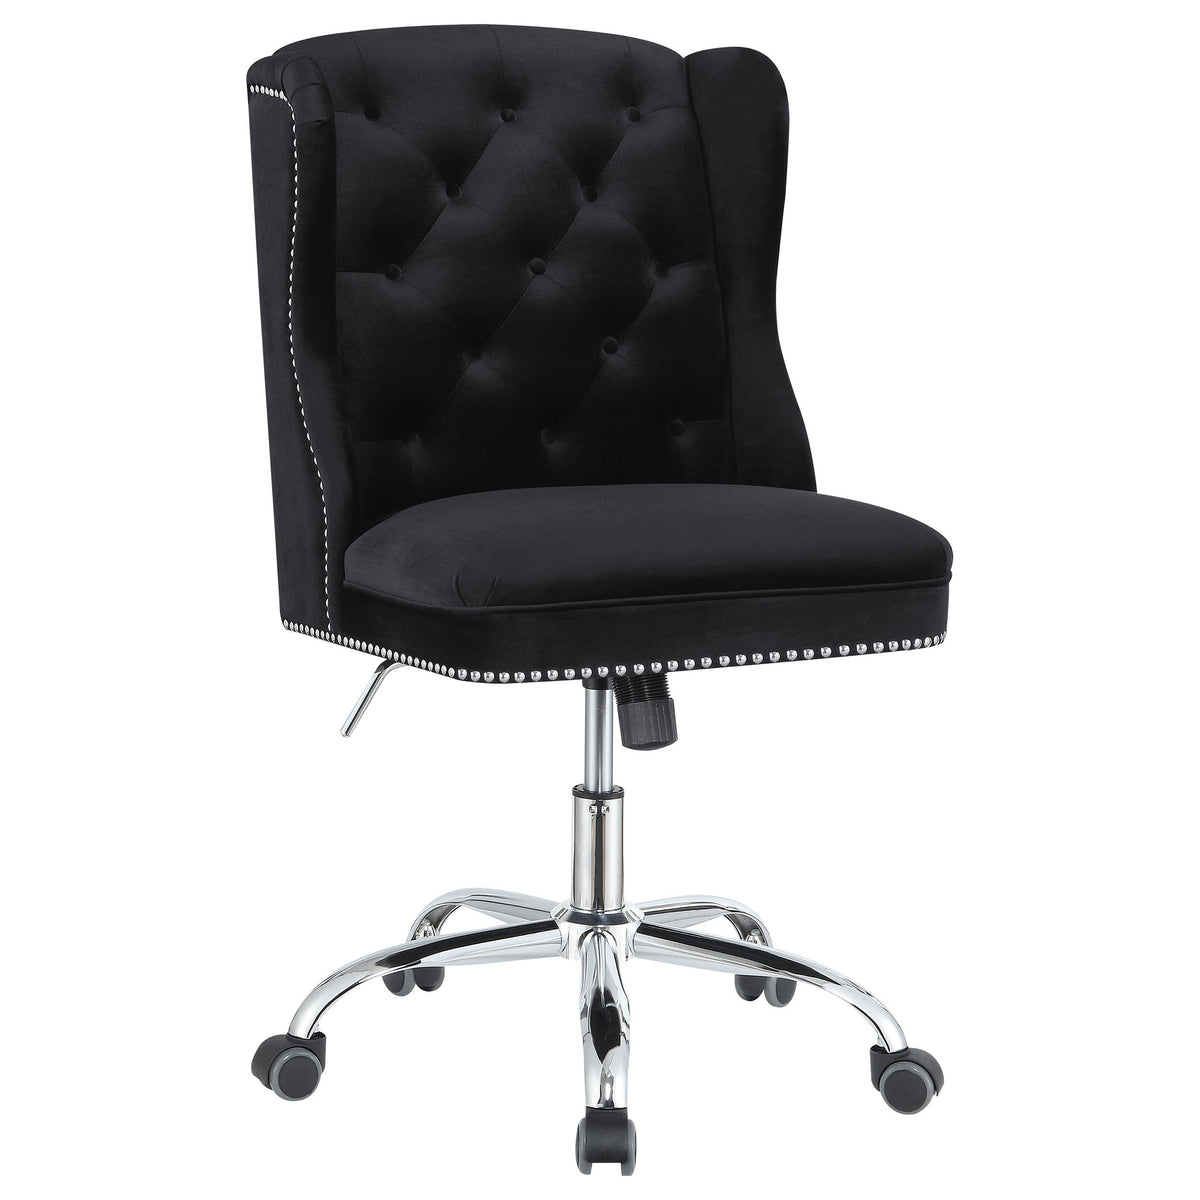 Julius Upholstered Tufted Office Chair Black and Chrome  Las Vegas Furniture Stores